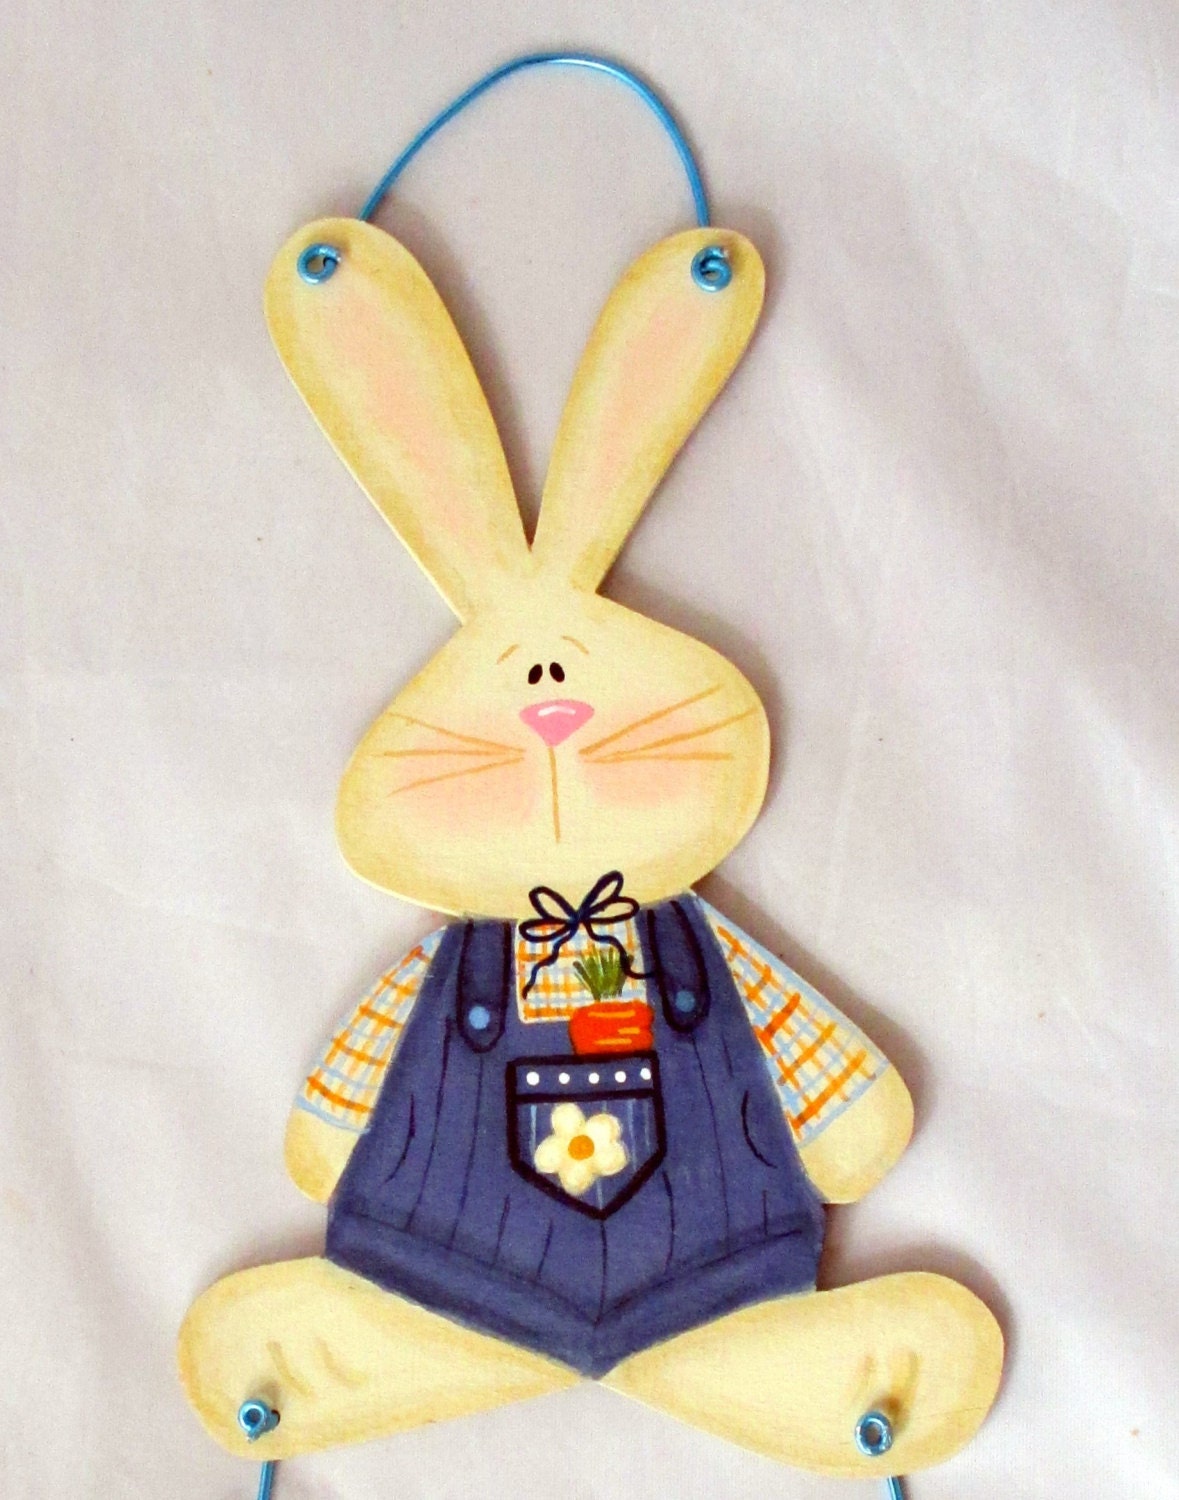 Rabbit painting wood crafts tole painting spring decor